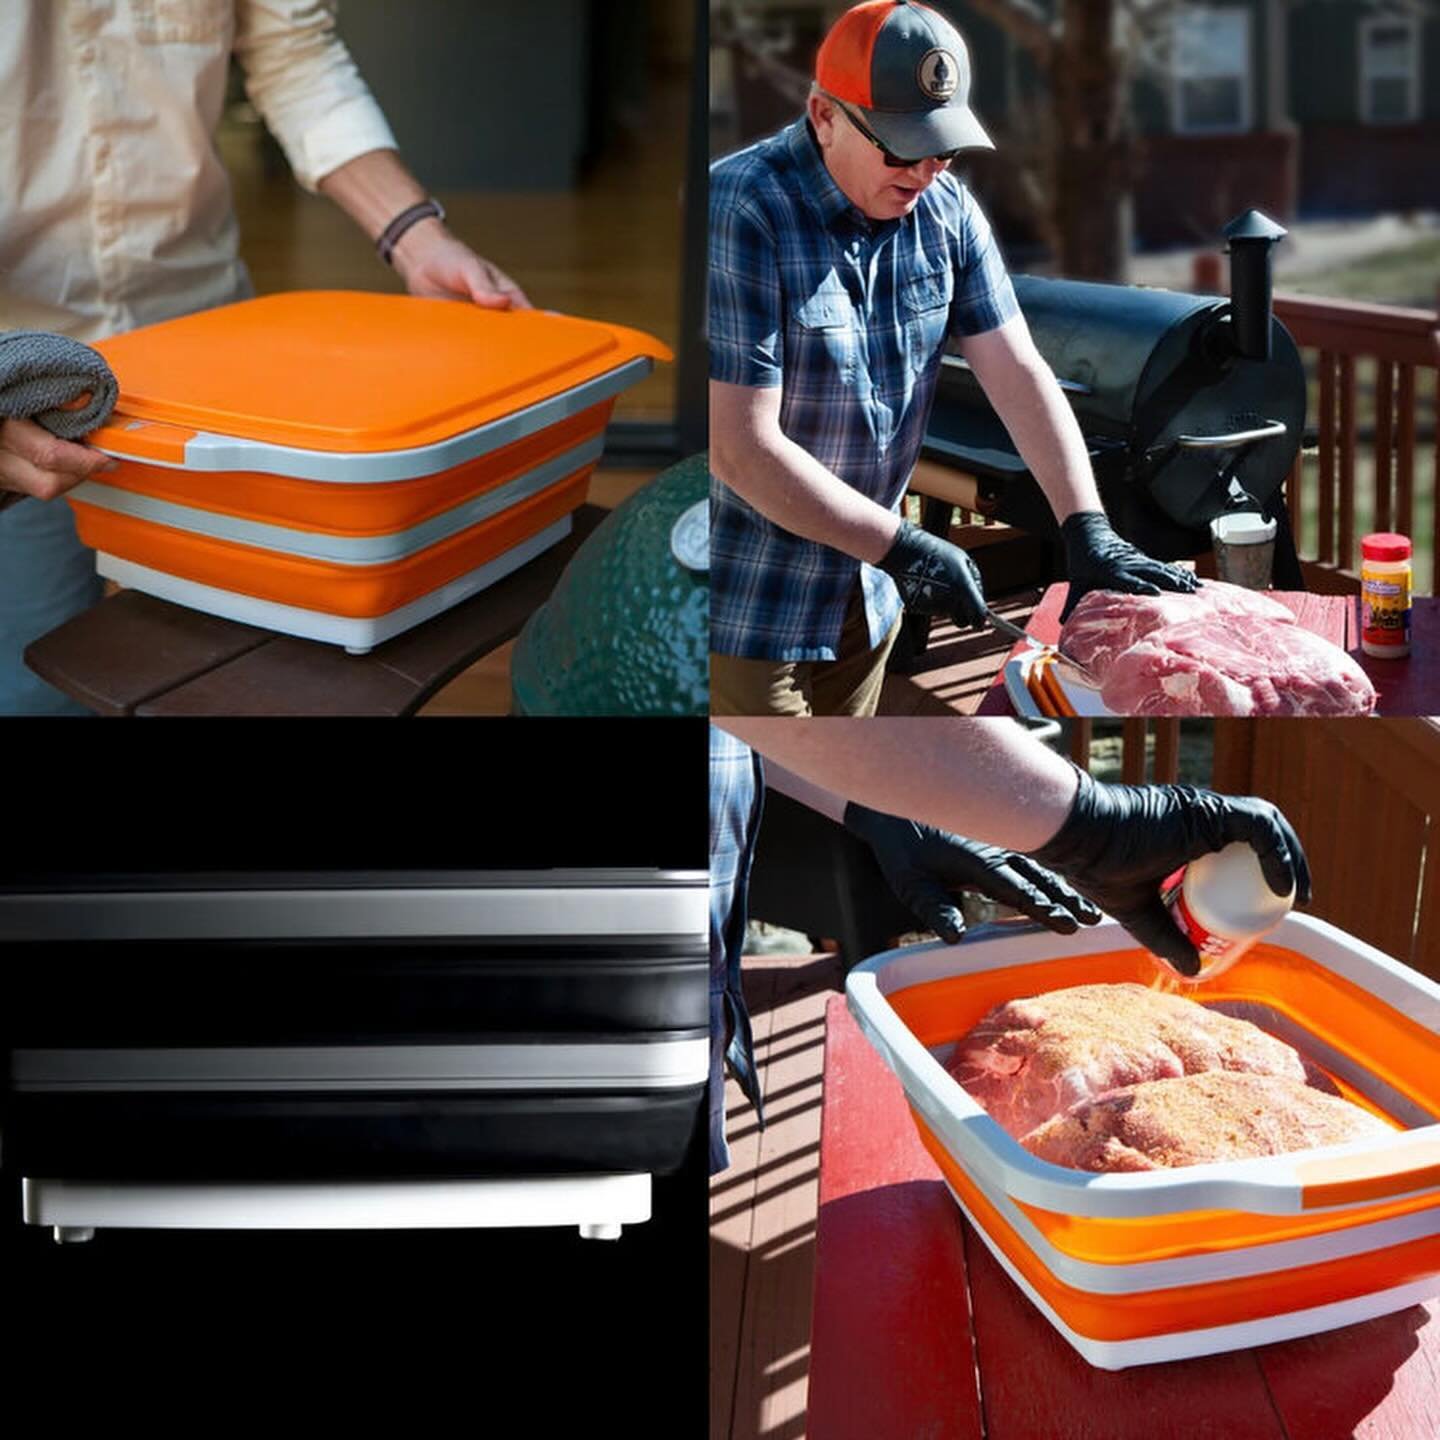 Memorial Day weekend MUST HAVE! The bestselling BBQ Prep Tub makes prep, marinating, and cleanup easy. It&rsquo;s collapsable and includes a built-in cutting board!  Game Changer! 

Shop here 👉🏼 https://www.bbqandmore.biz/grilling-1/bbq-prep-tub

G